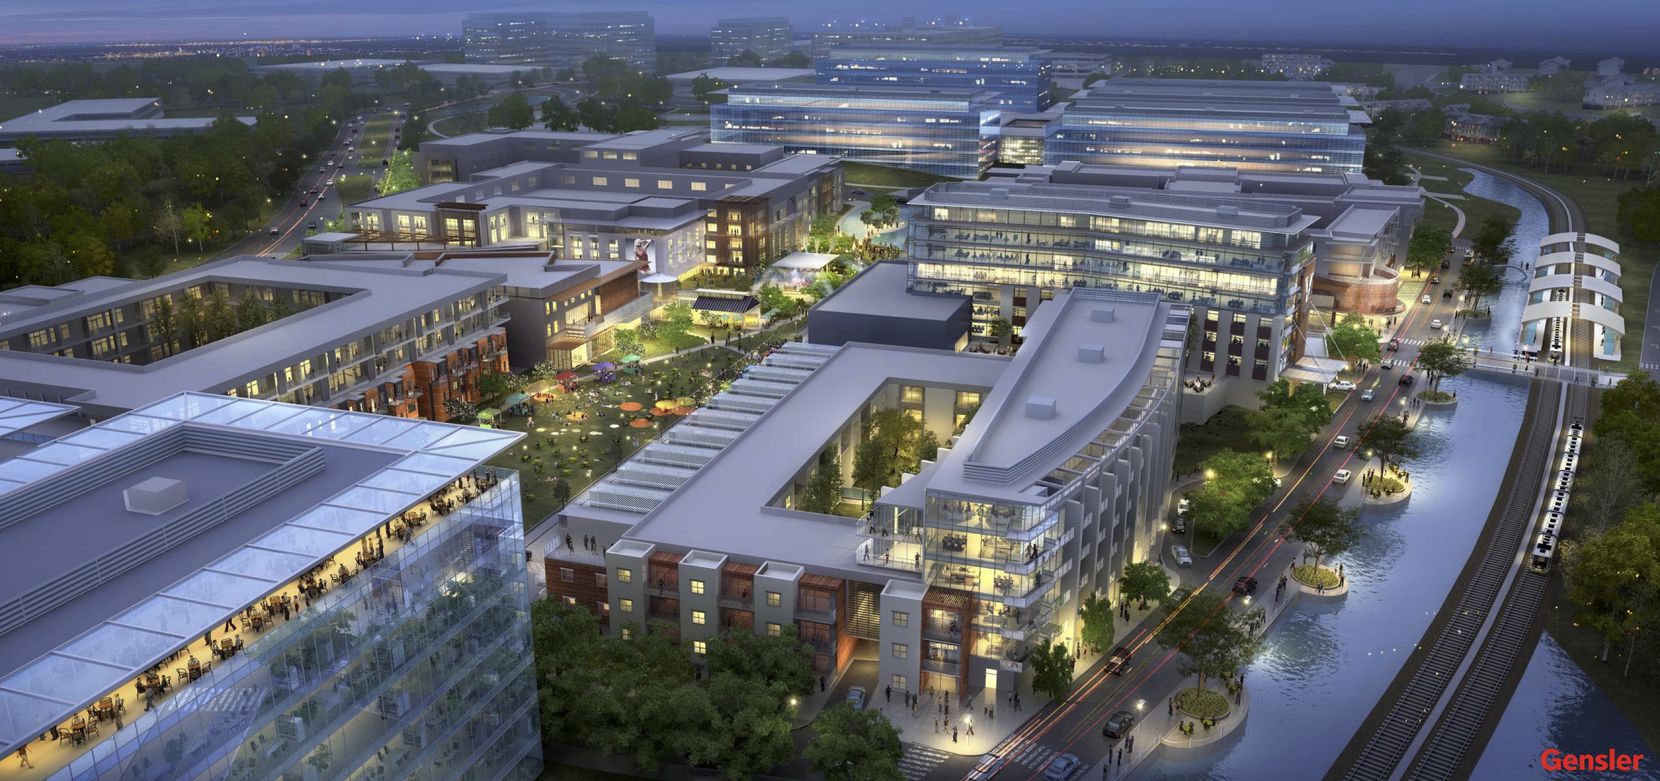 More than 3 million square feet of offices are planned for the 150 acres across from Verizon's existing campus.